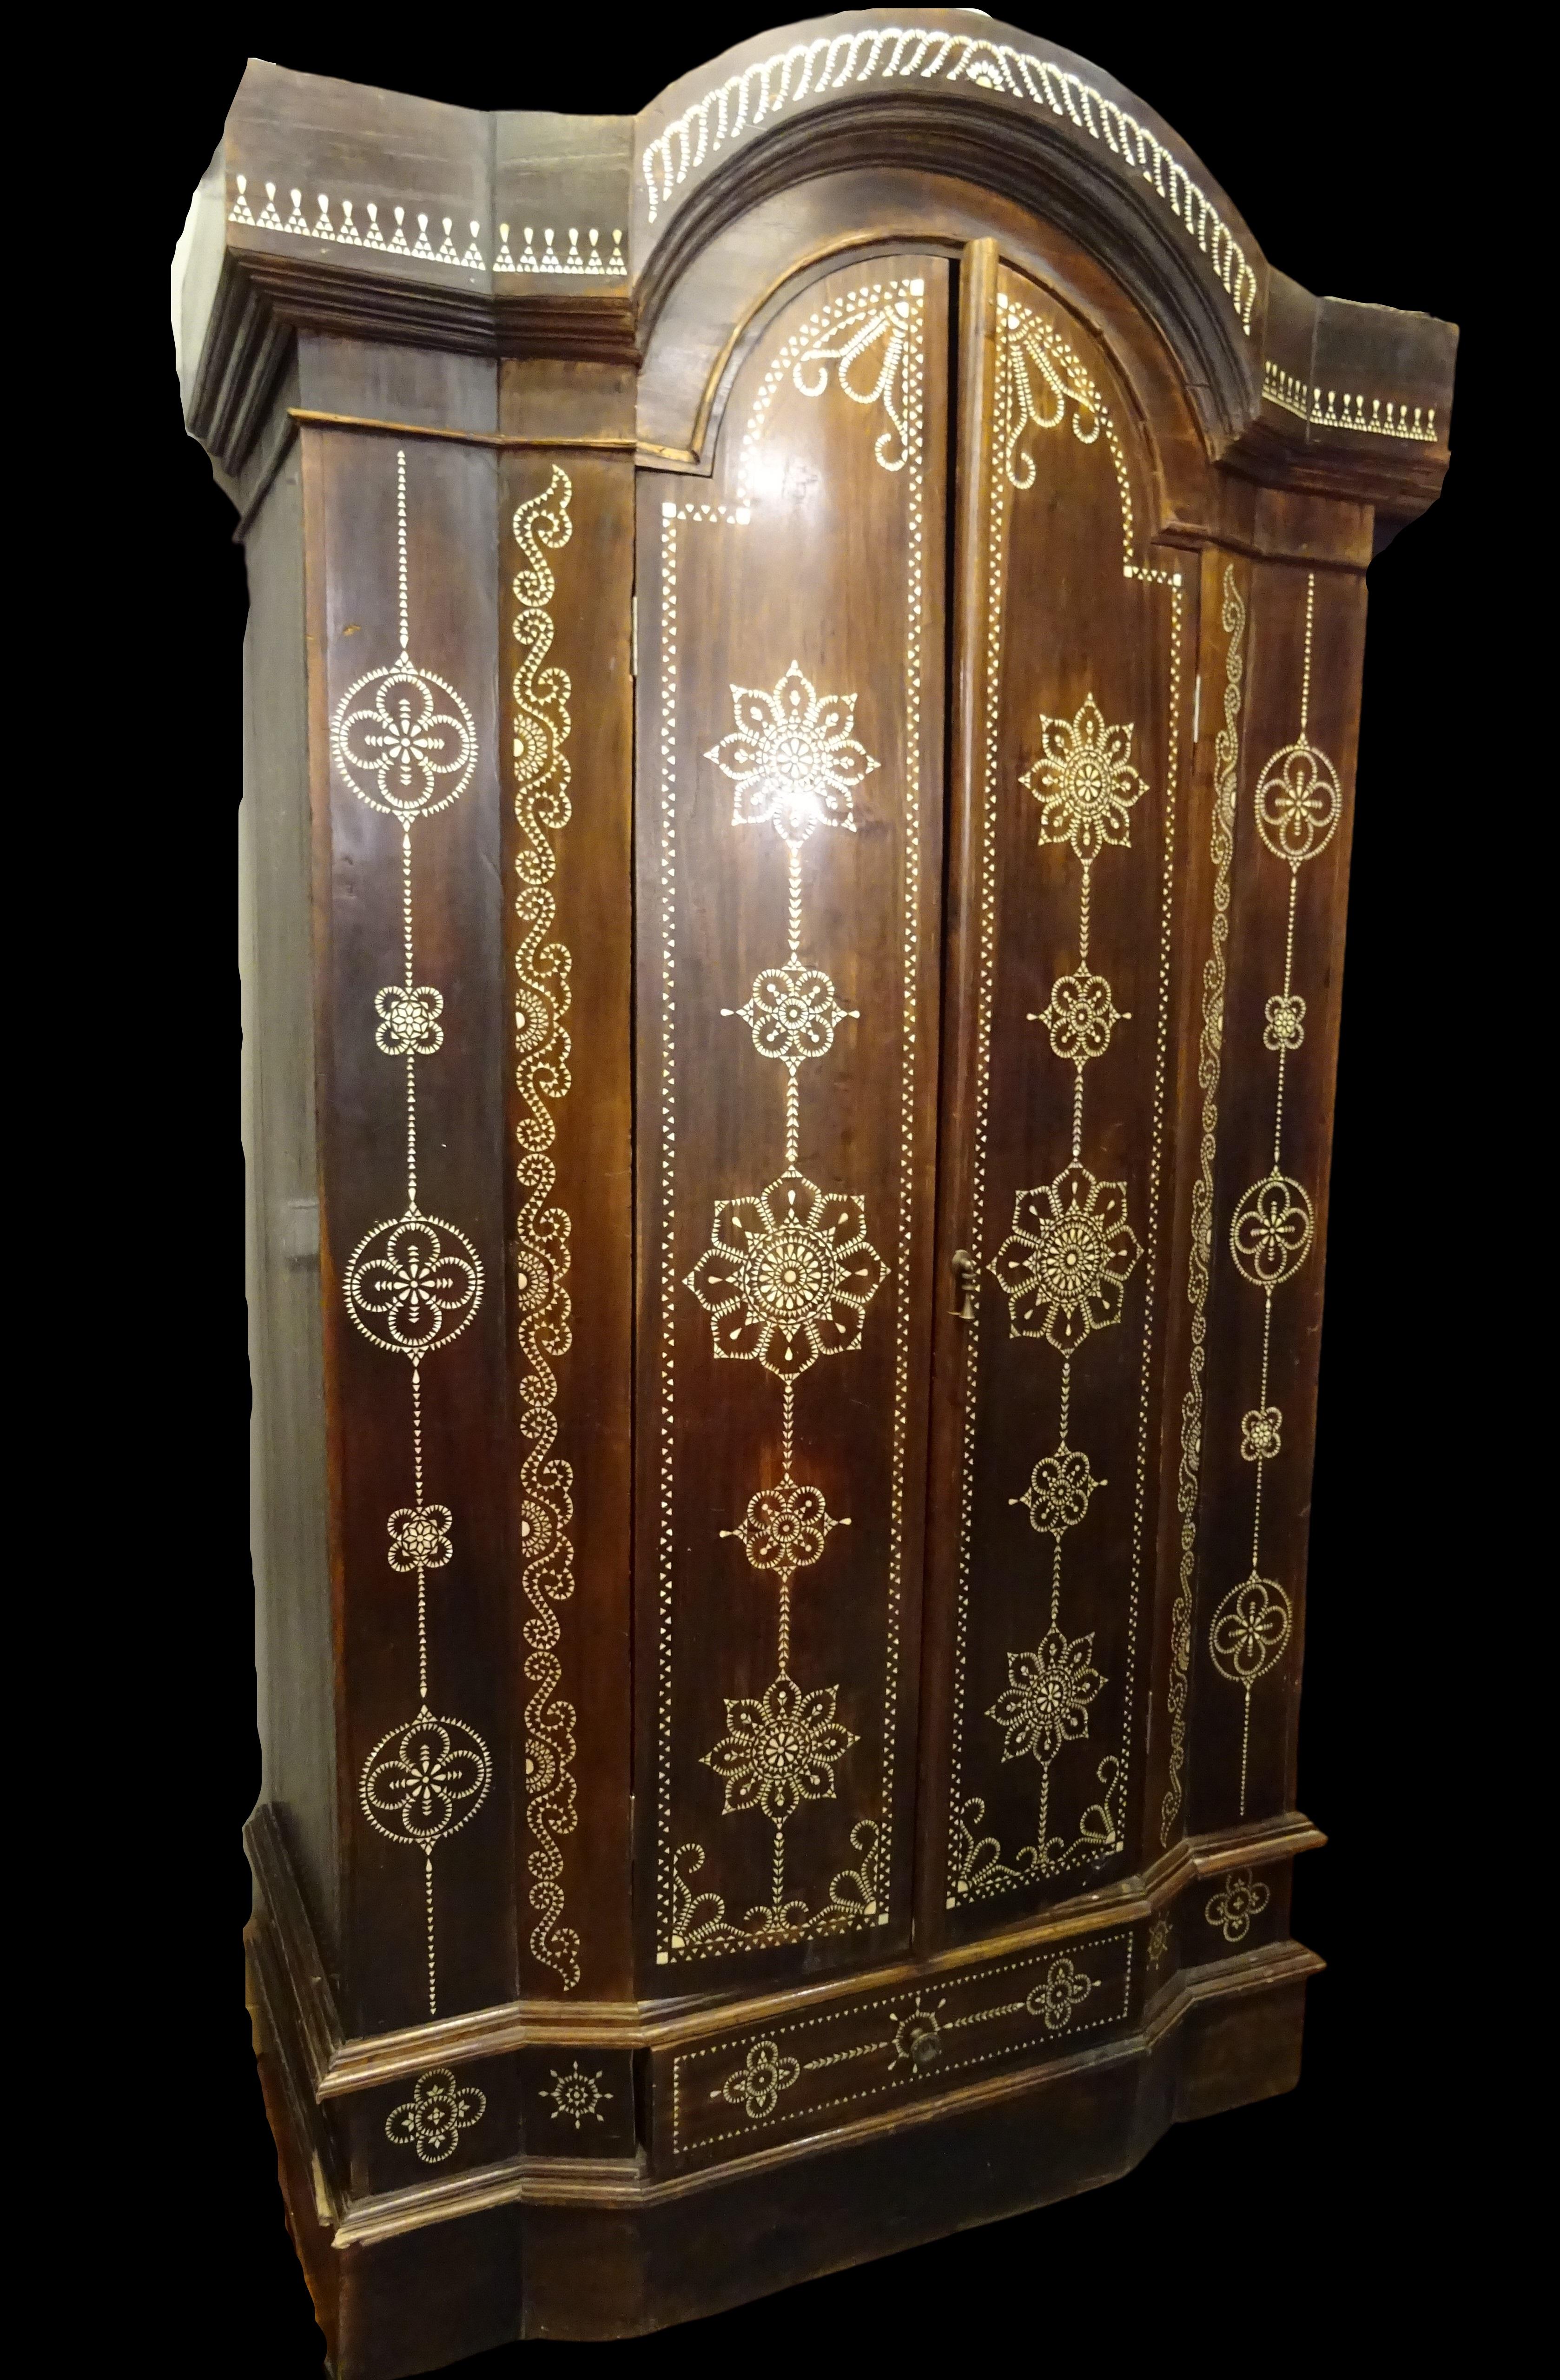 Amazing and very beautiful Indian wardrobe in mother of pearl inlaid wooden, with mandalas motifs.
It was purchased in a private Arabic collection on the south of Spain (Marbella)
It’s an extraordinary armoire in any room, a beautiful work of